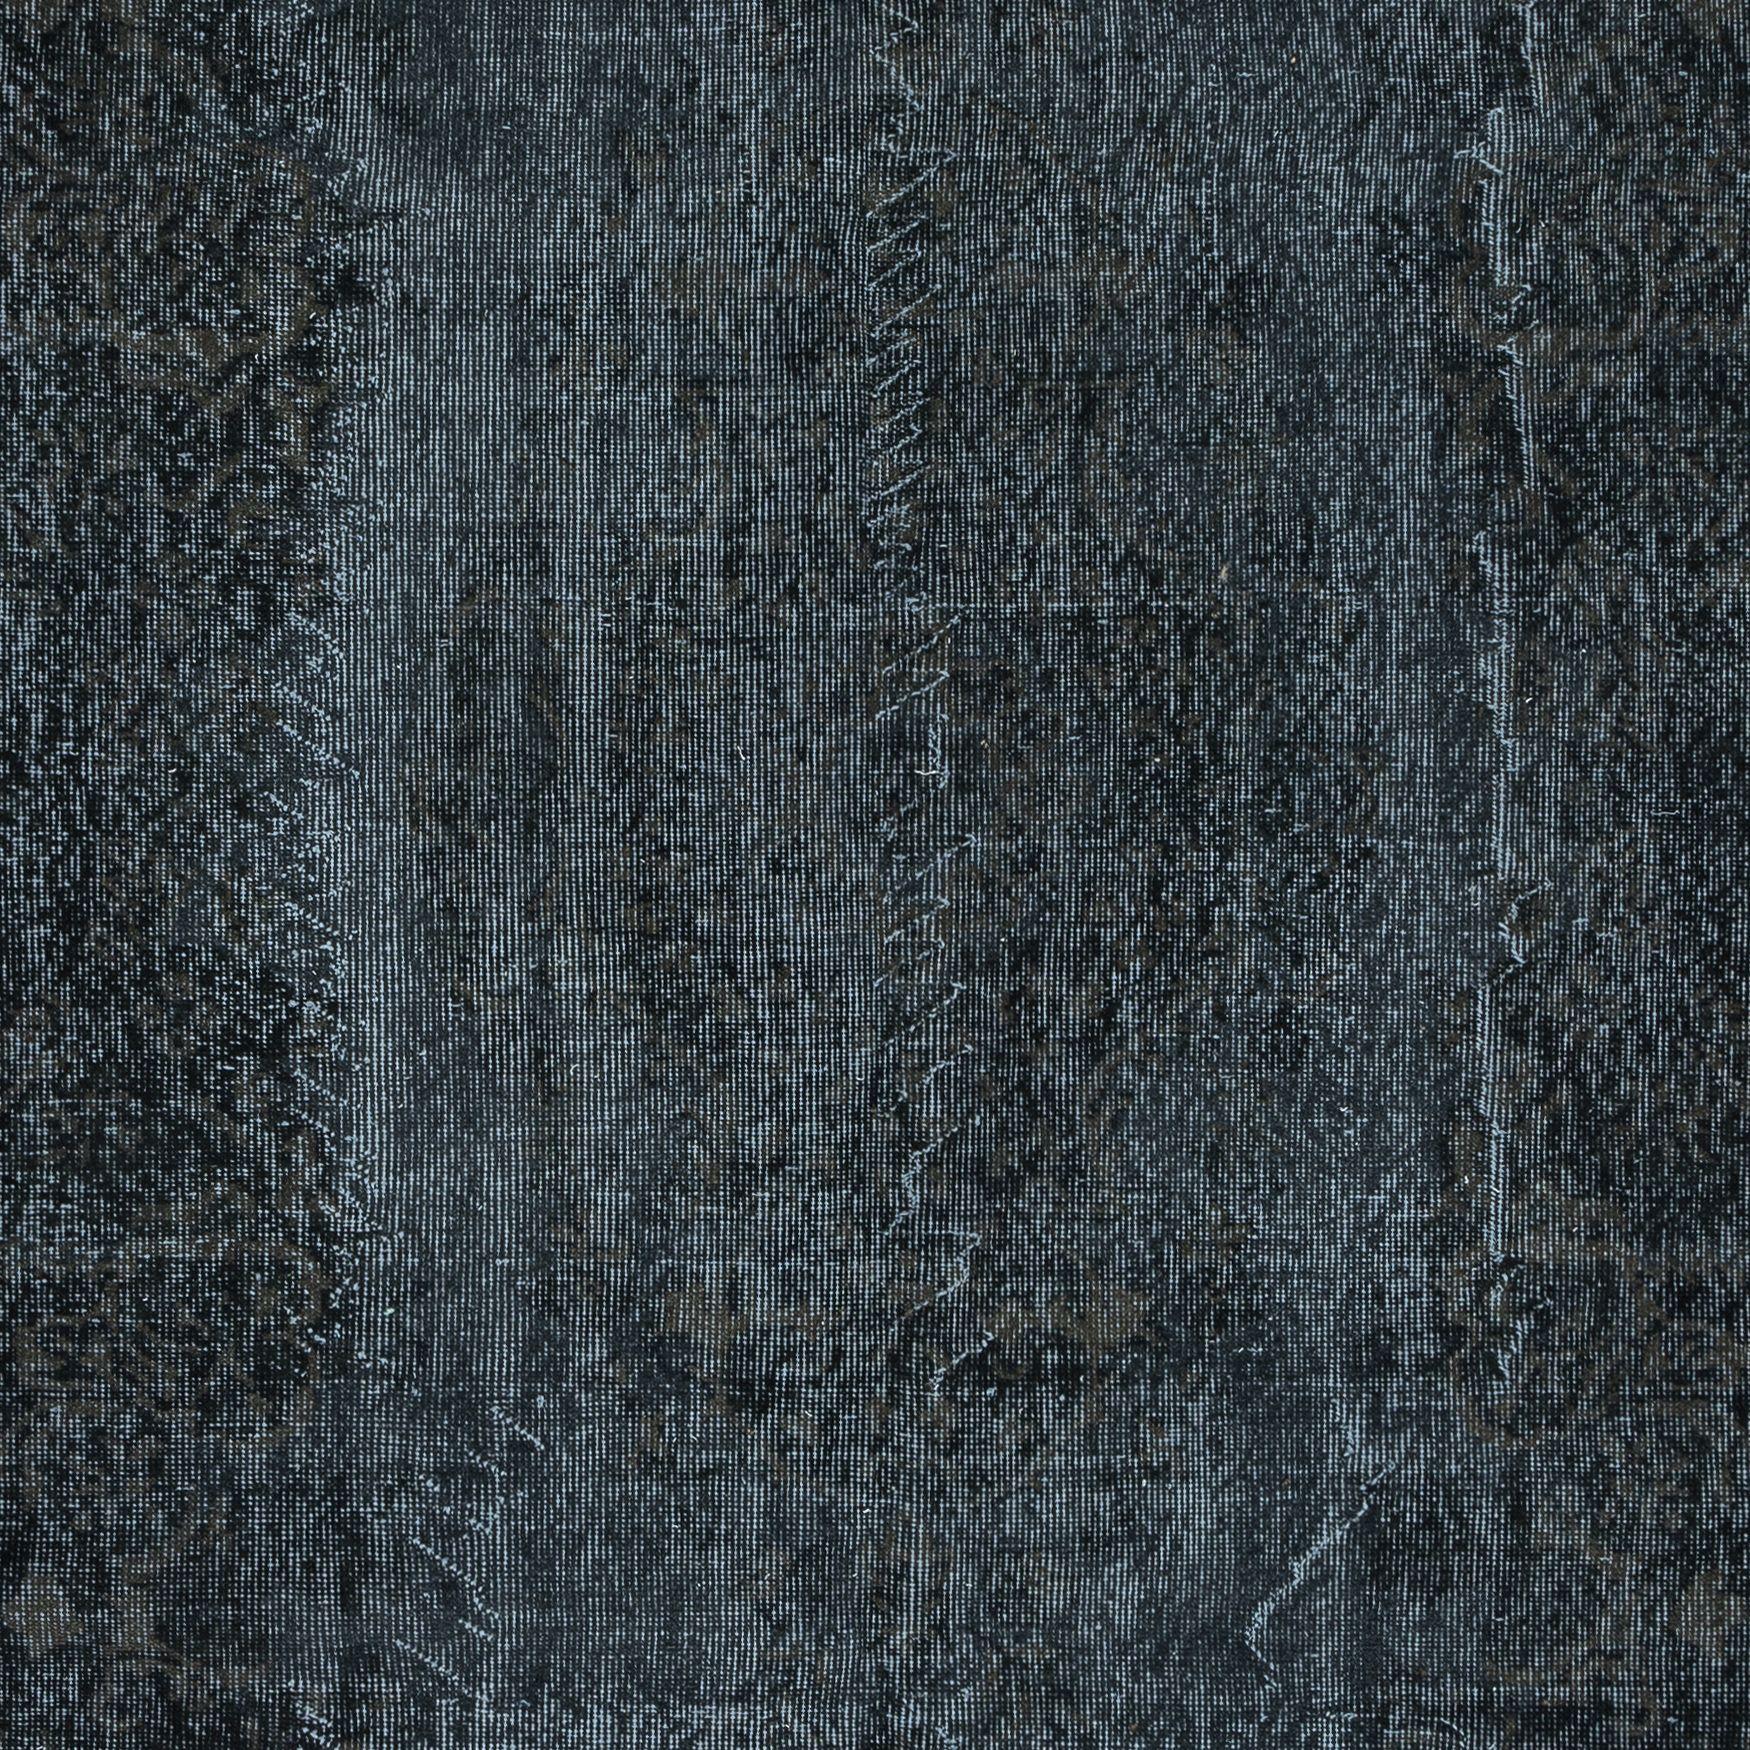 5.7x9.2 Ft Handmade Charcoal Gray Area Rug, Modern Anatolian Black Wool Carpet In Good Condition For Sale In Philadelphia, PA